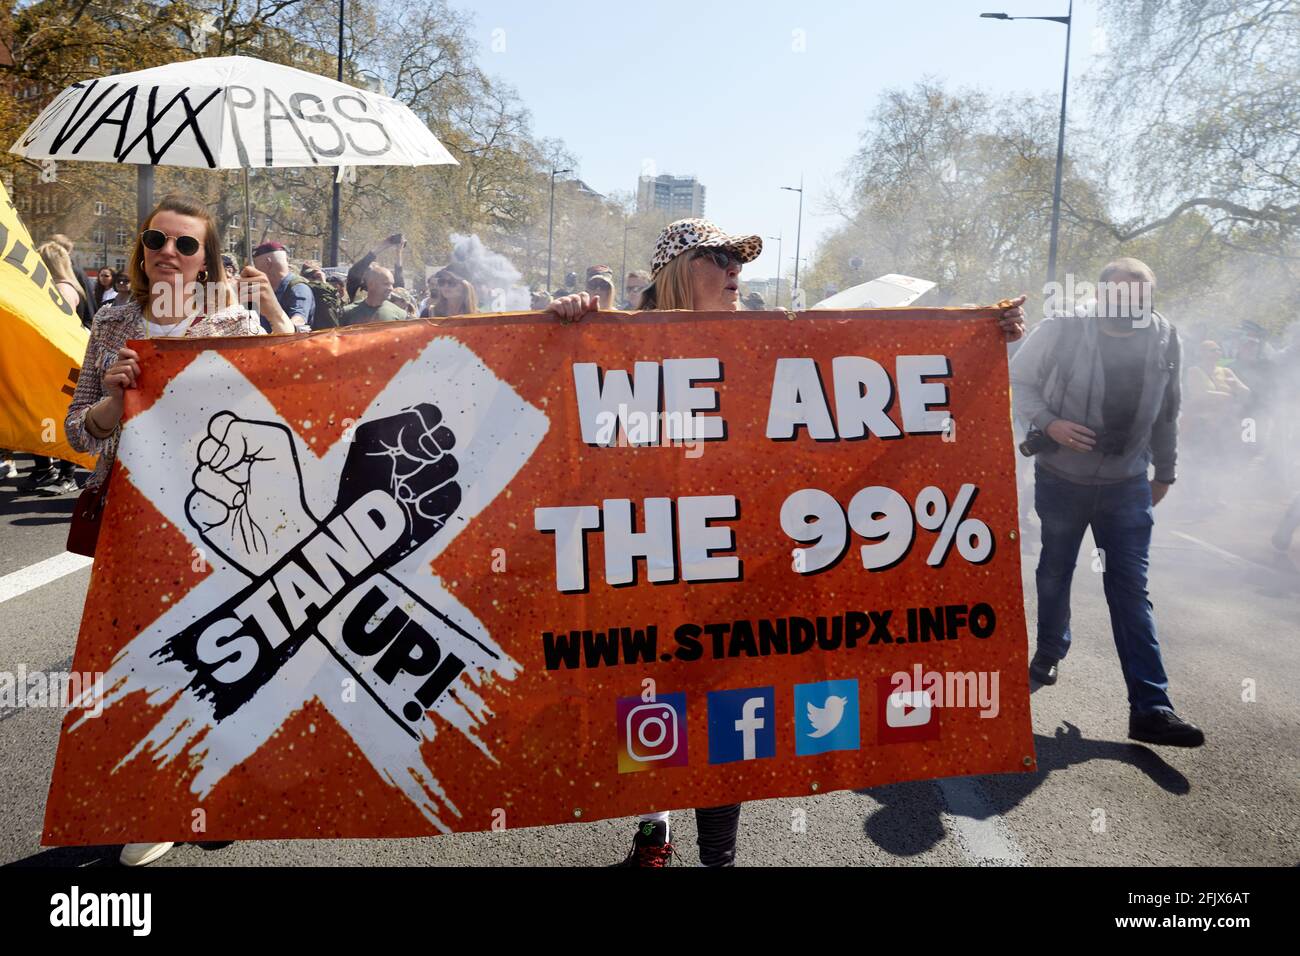 London, UK - 24 Apr 2021: Protestors marching in central London calling for a lifting of all coronavirus restrictions. Stock Photo